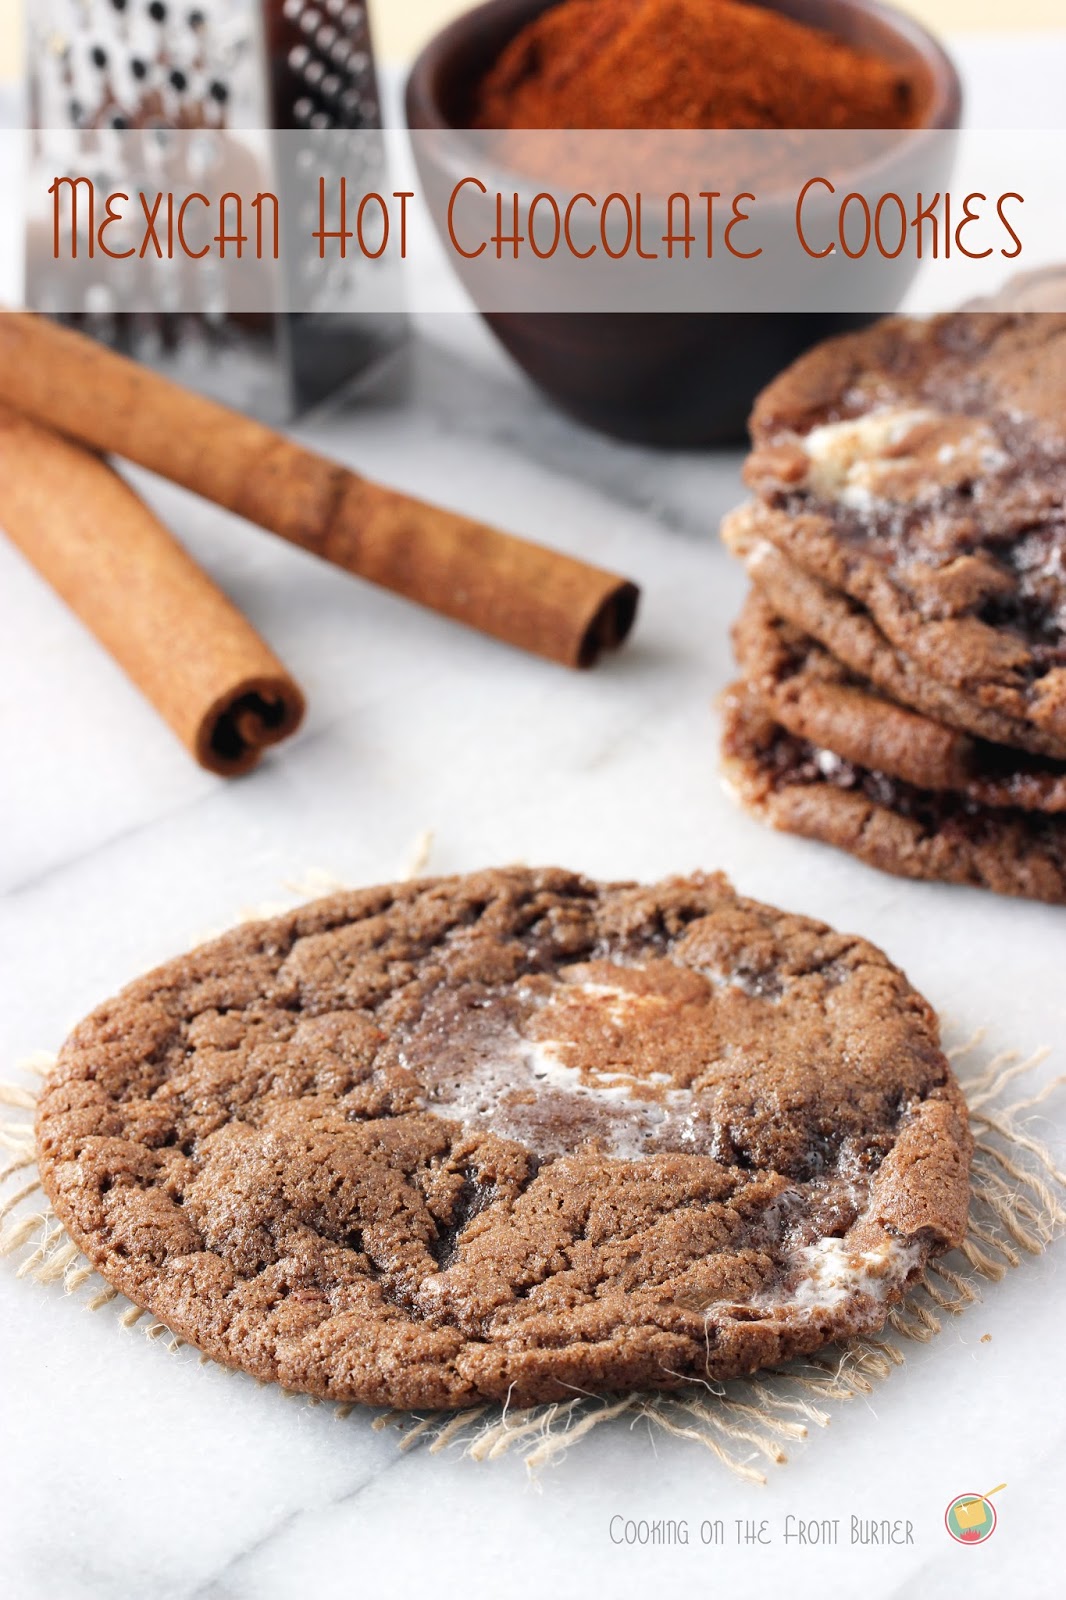 Mexican Hot Chocolate Cookies | Cooking on the Front Burner